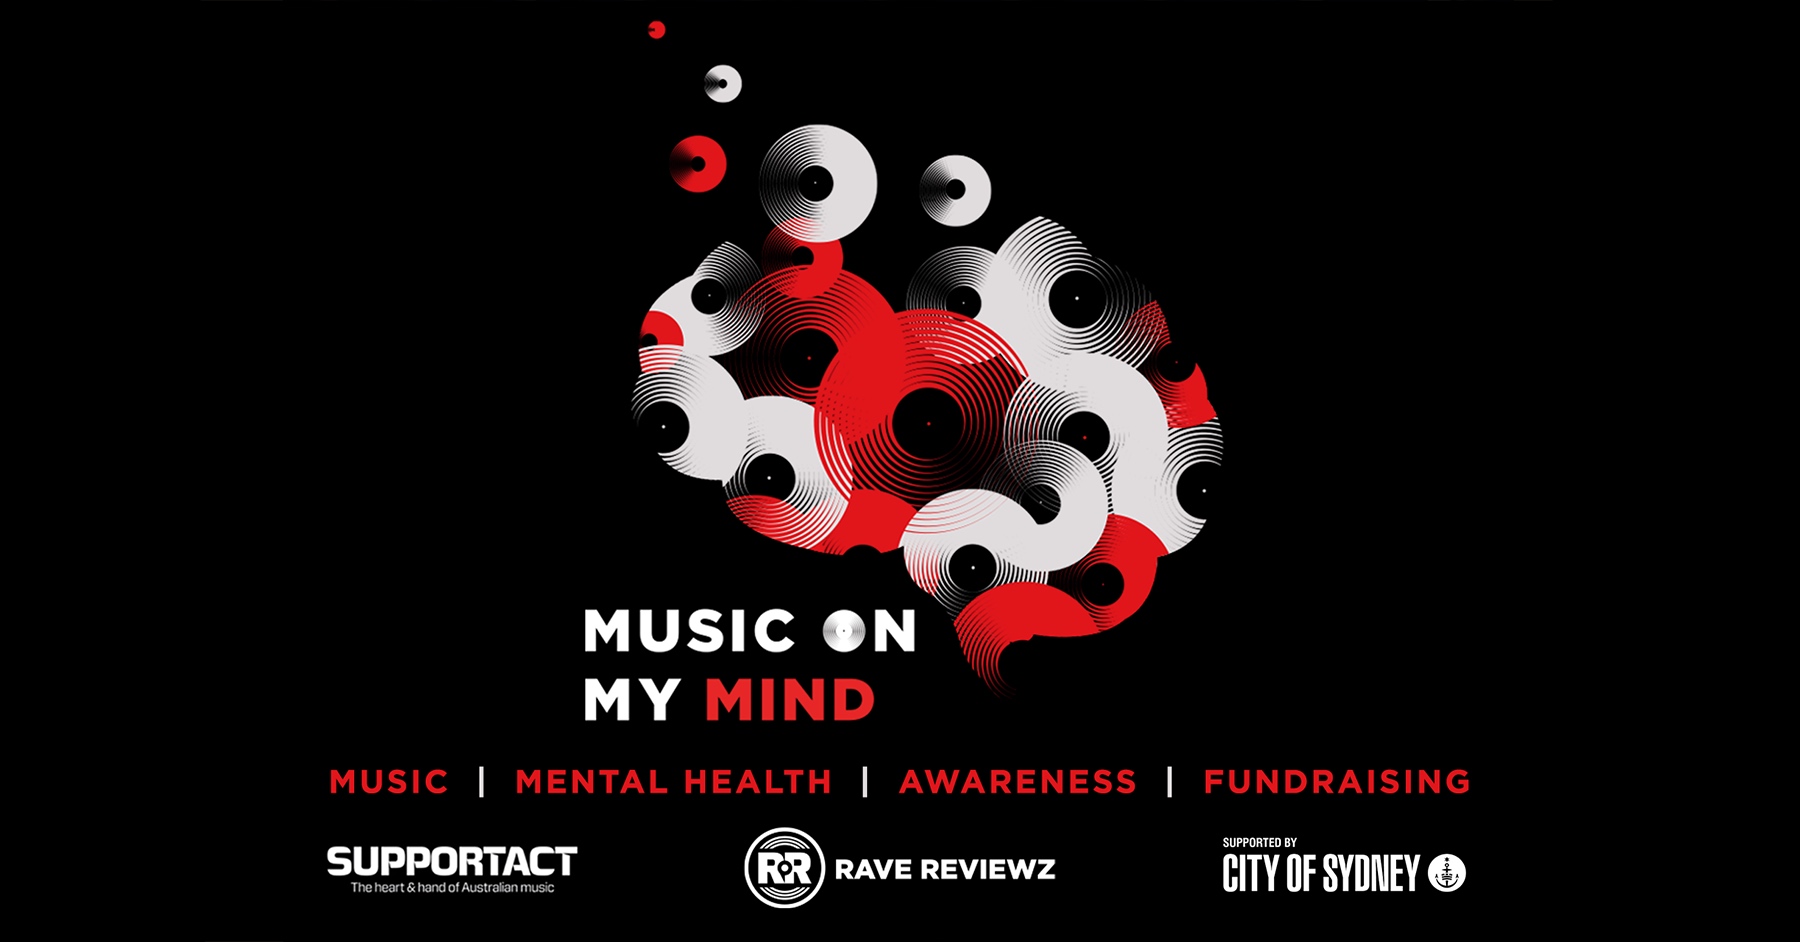 Music On My Mind event to draw attention to mental health struggles in music community